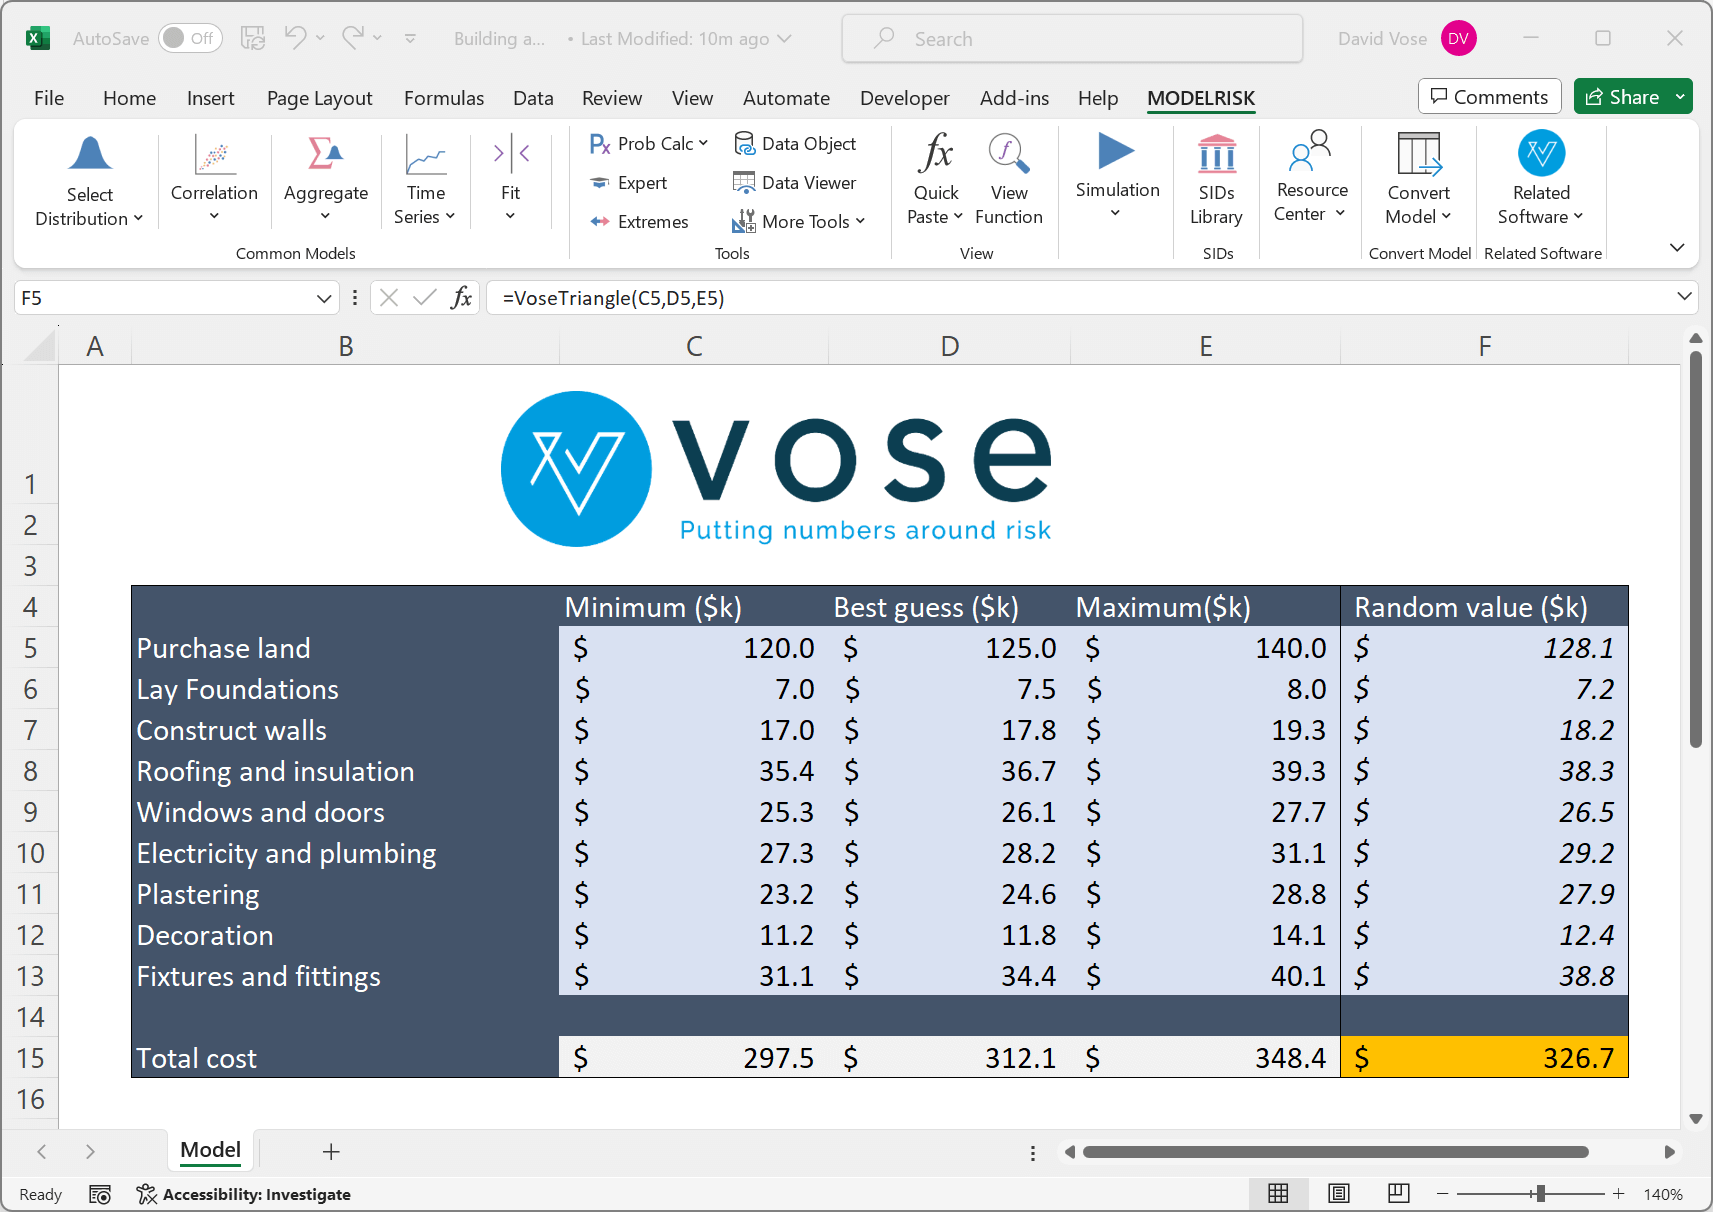 Spreadsheet model with uncertainty added using ModelRisk